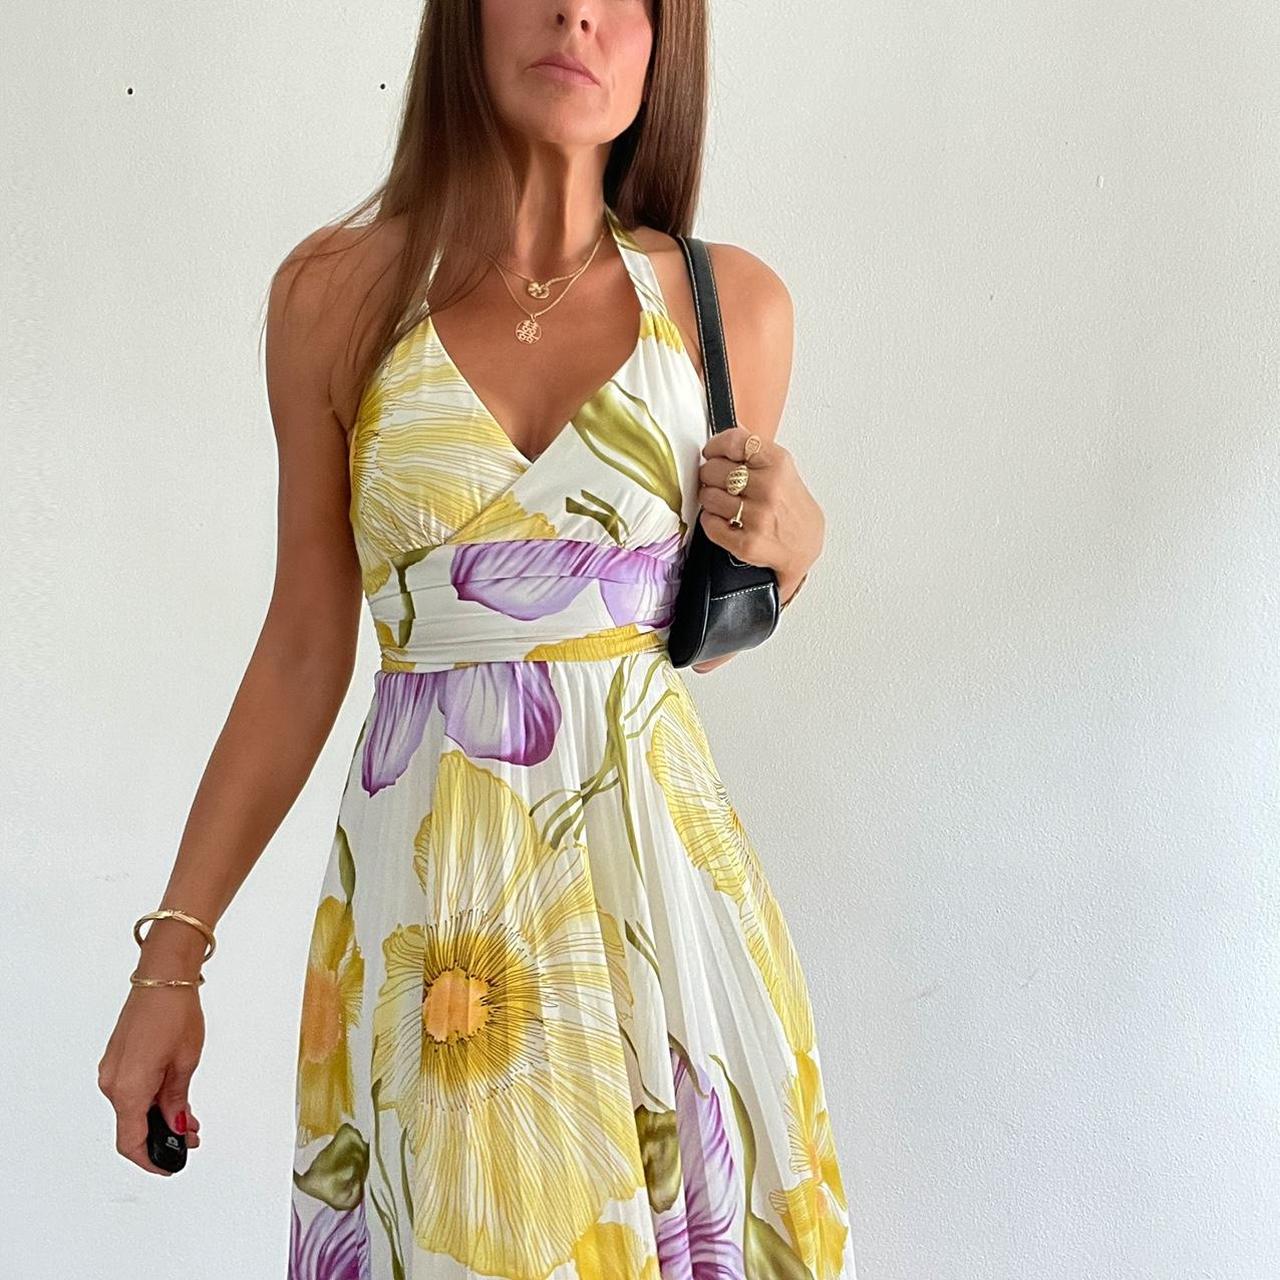 Product Image 3 - Vintage floral watercolor midi dress

The